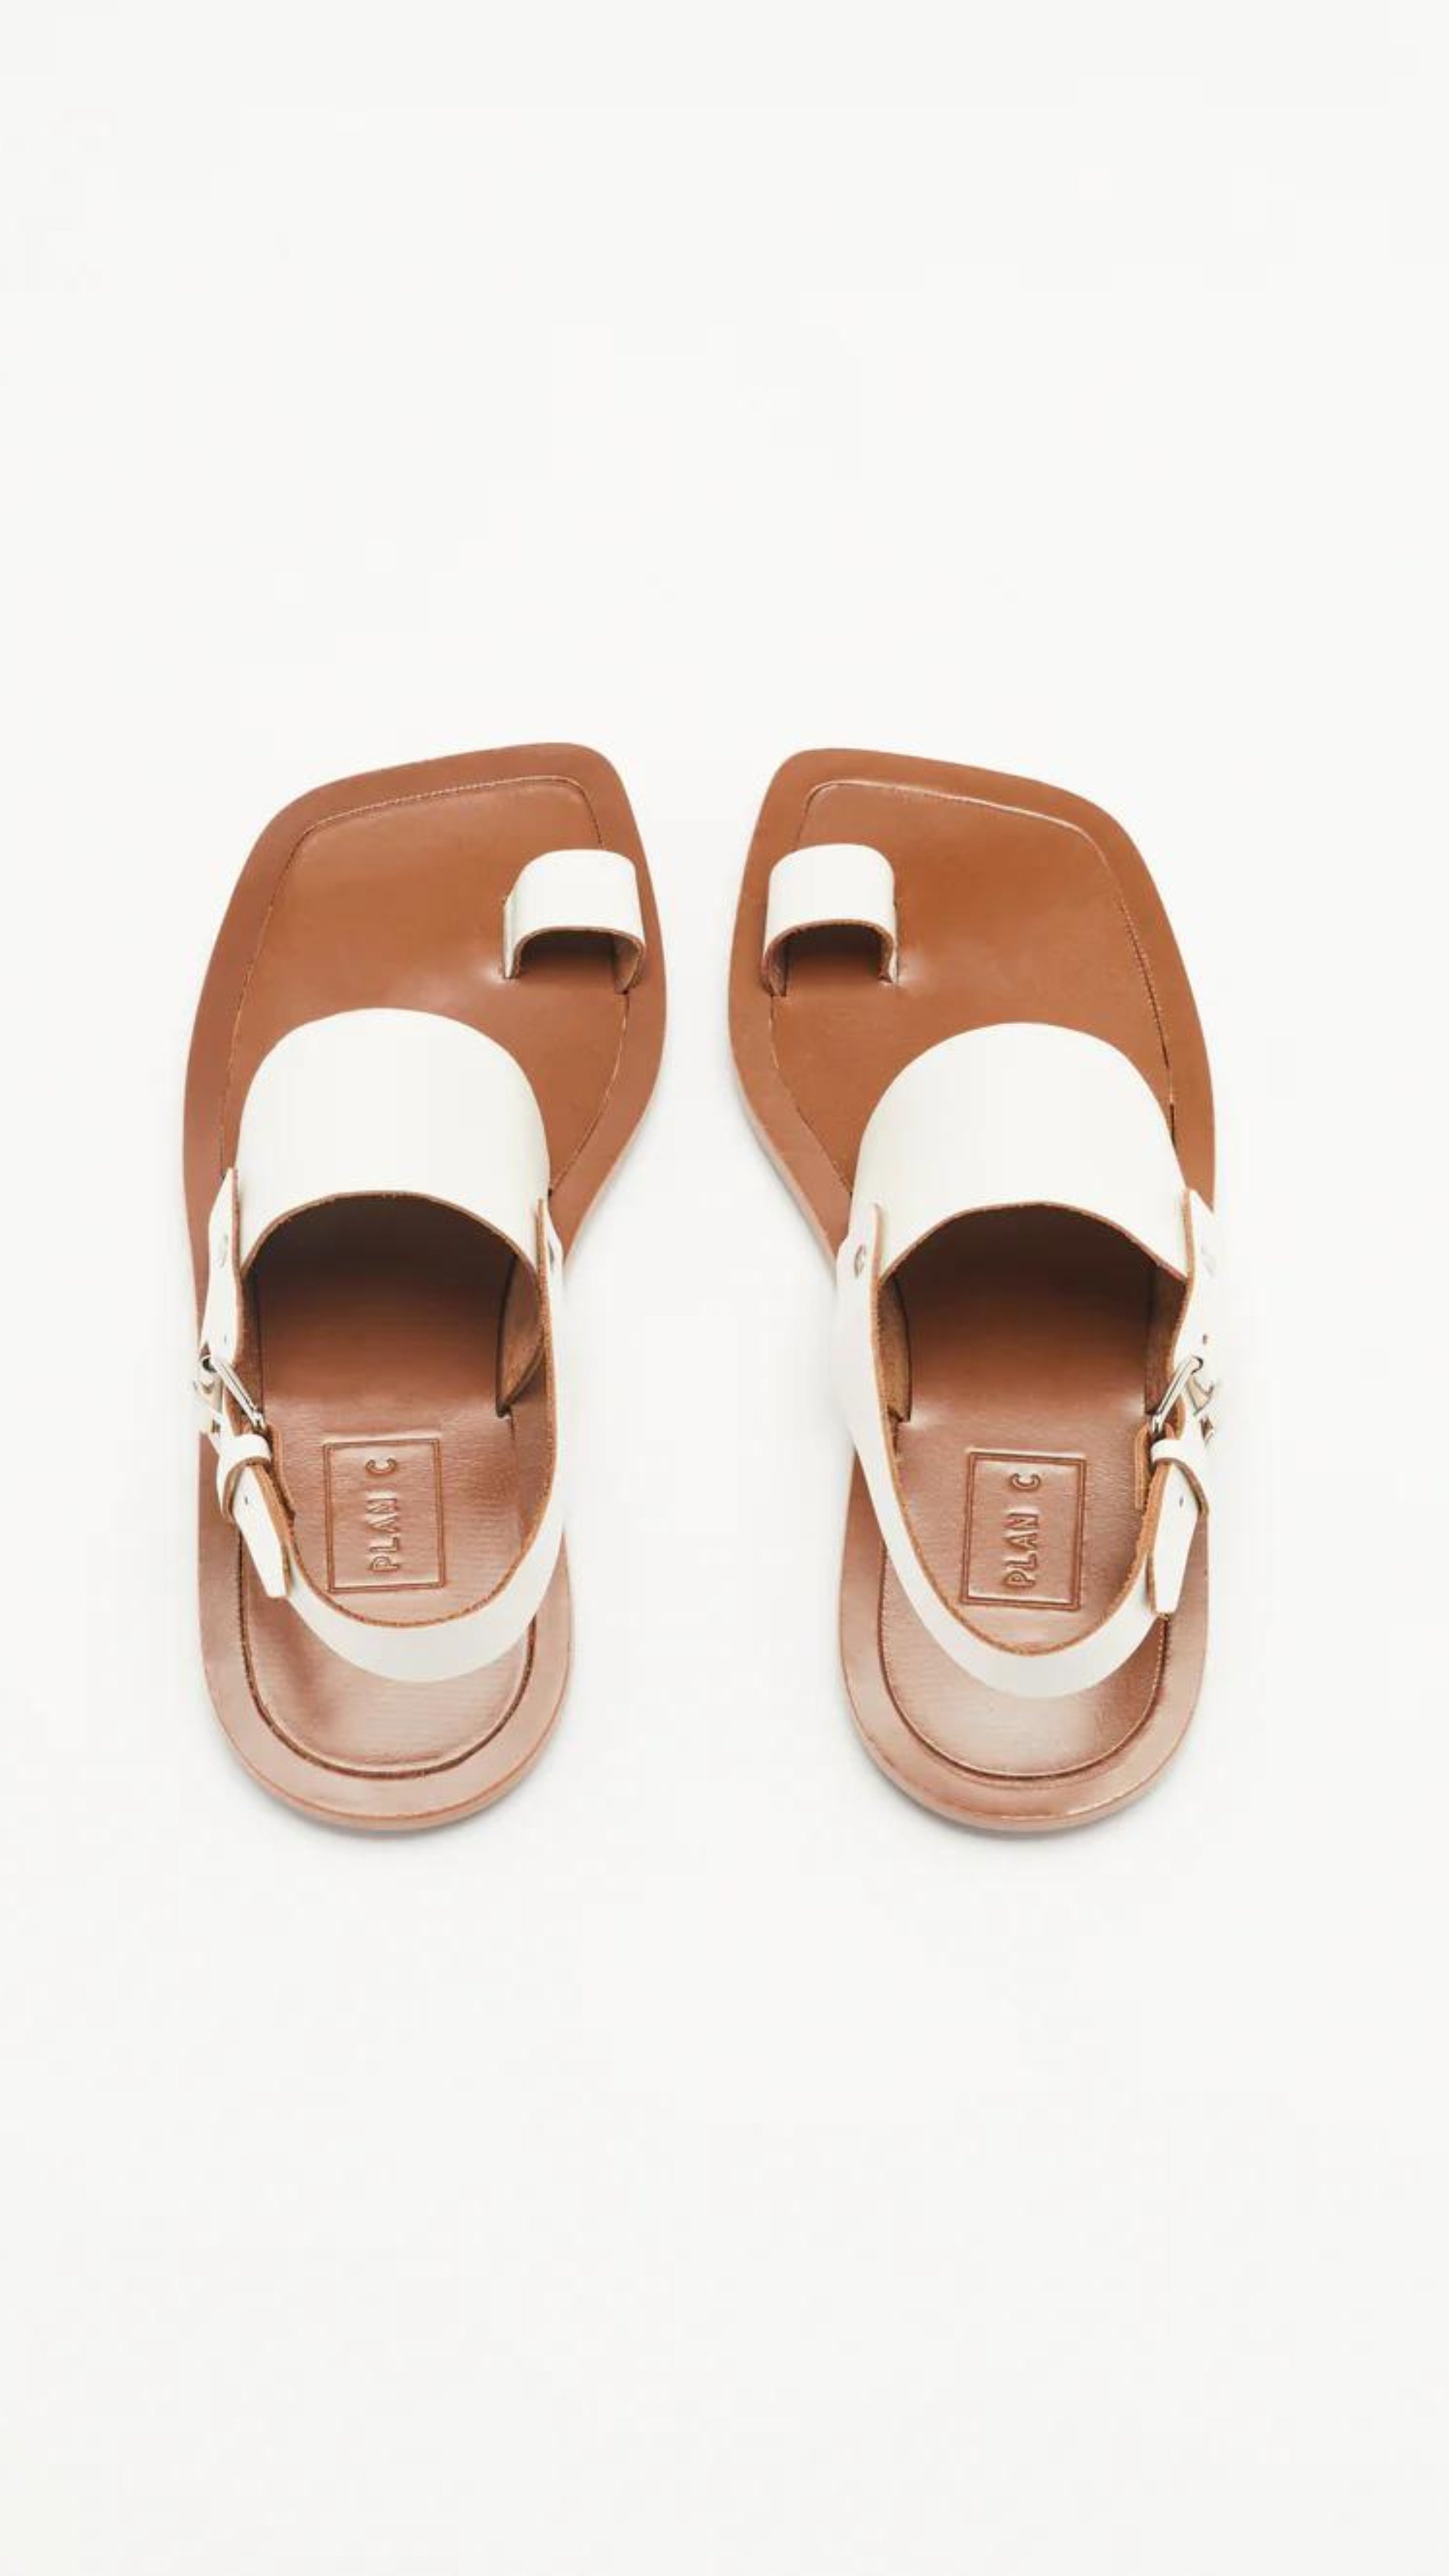 Plan C White Toe Ring Sandals. Made in Italy, these sandals have a strap across the foot, buckle around the heel and a ring of leather at the big toe. Flat sandals with a leather sole. Photo shown from the top.